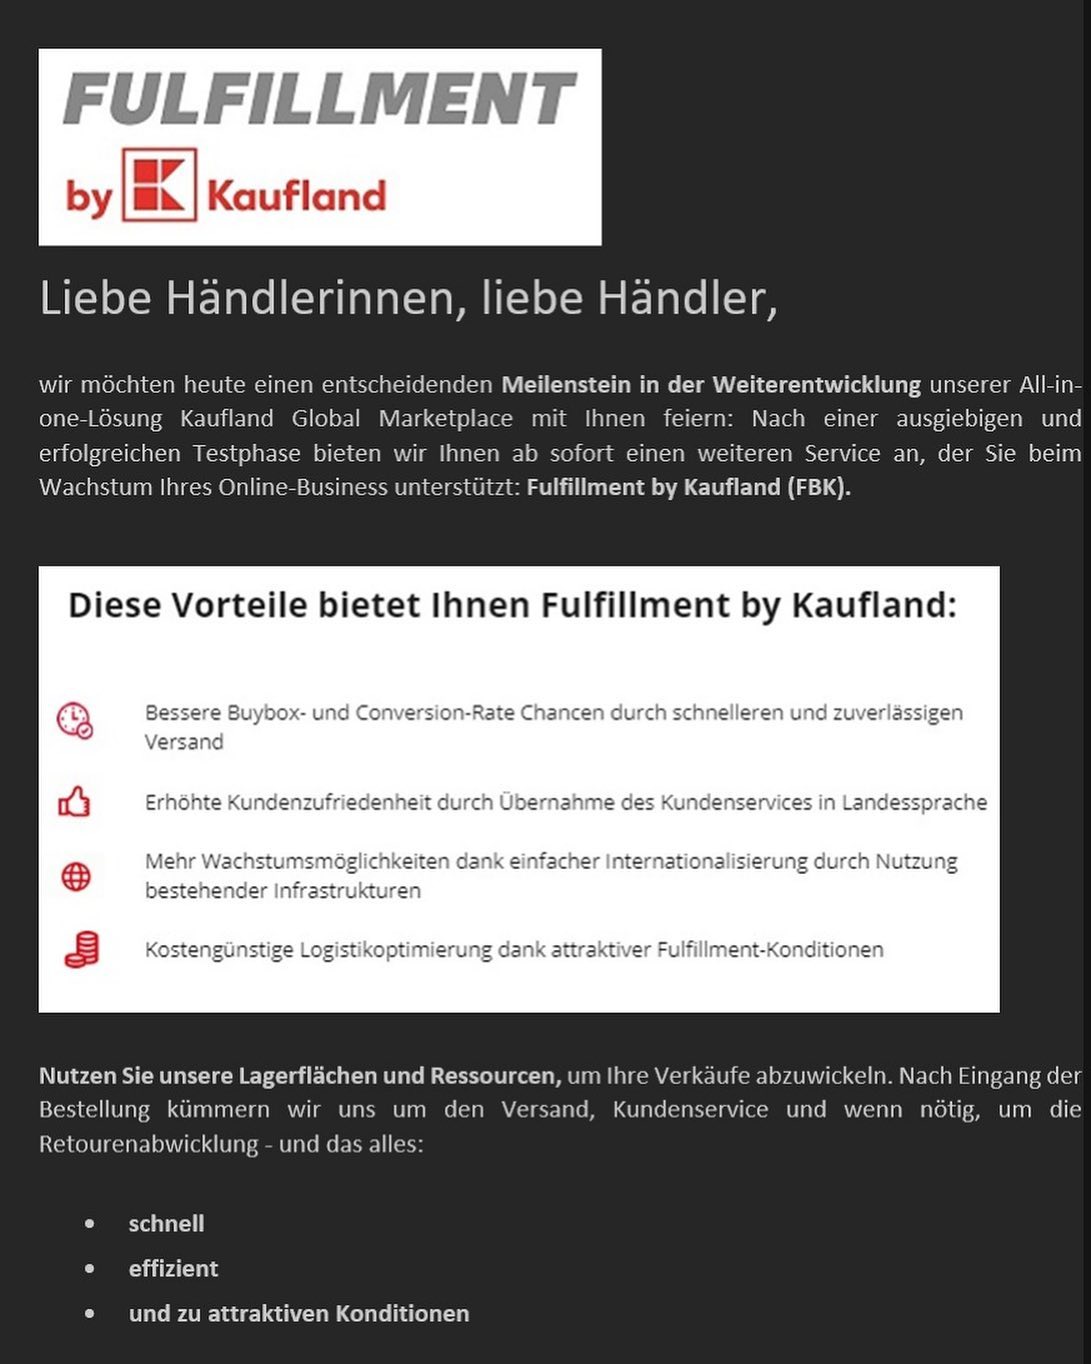 Fulfillment by Kaufland